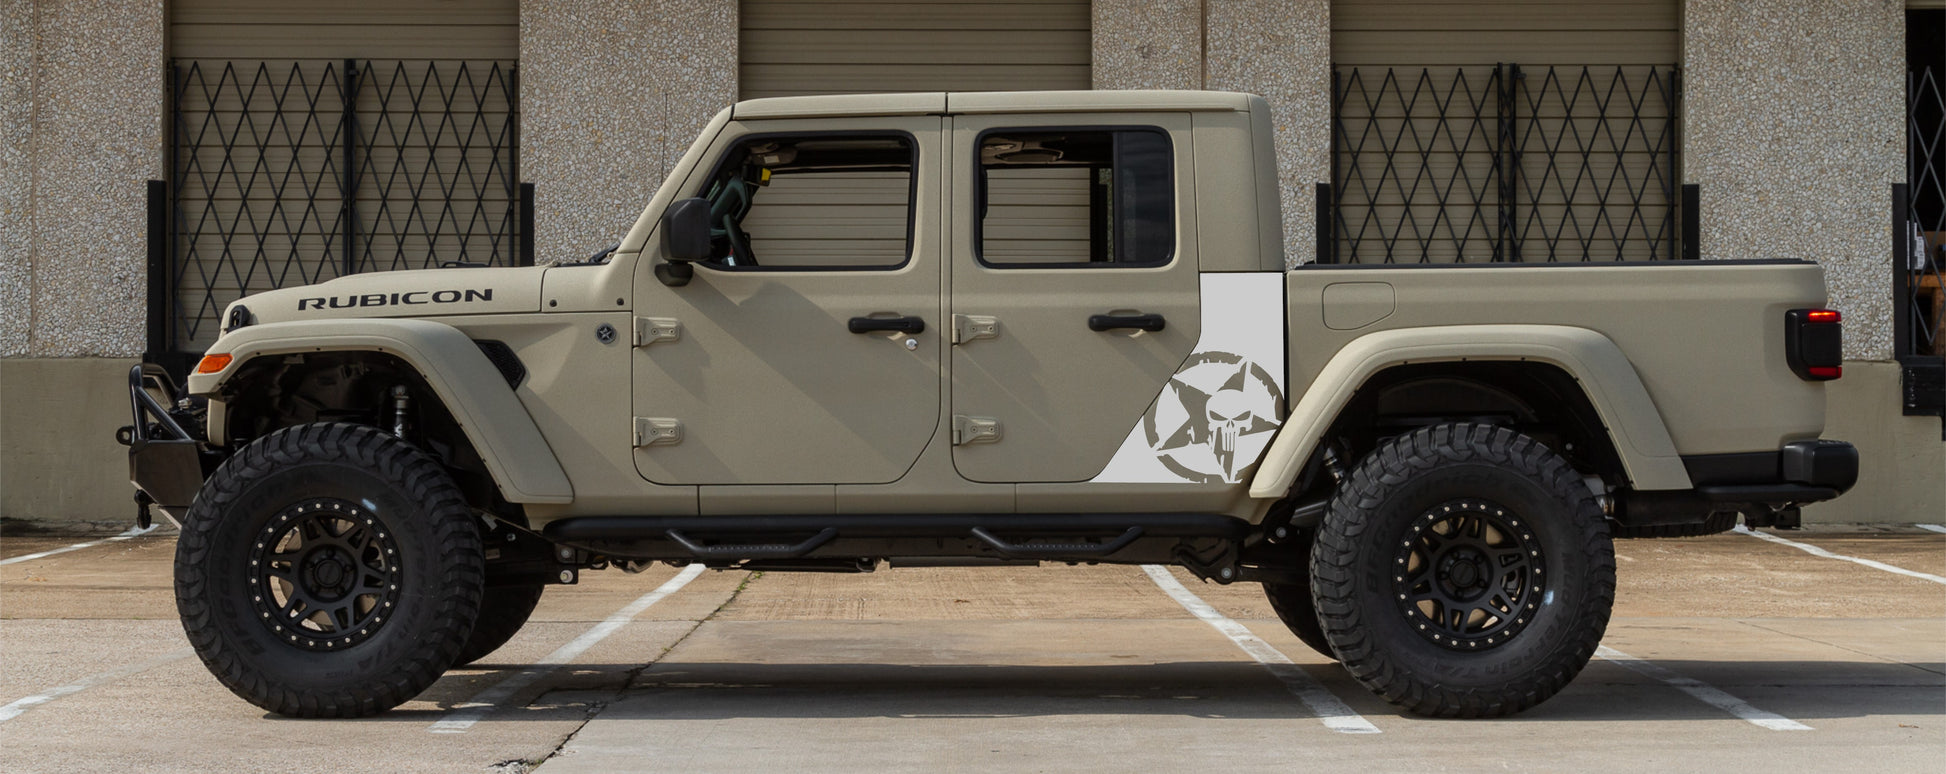 Punisher Military Star Decals Car Stickers For Jeep Gladiator Truck